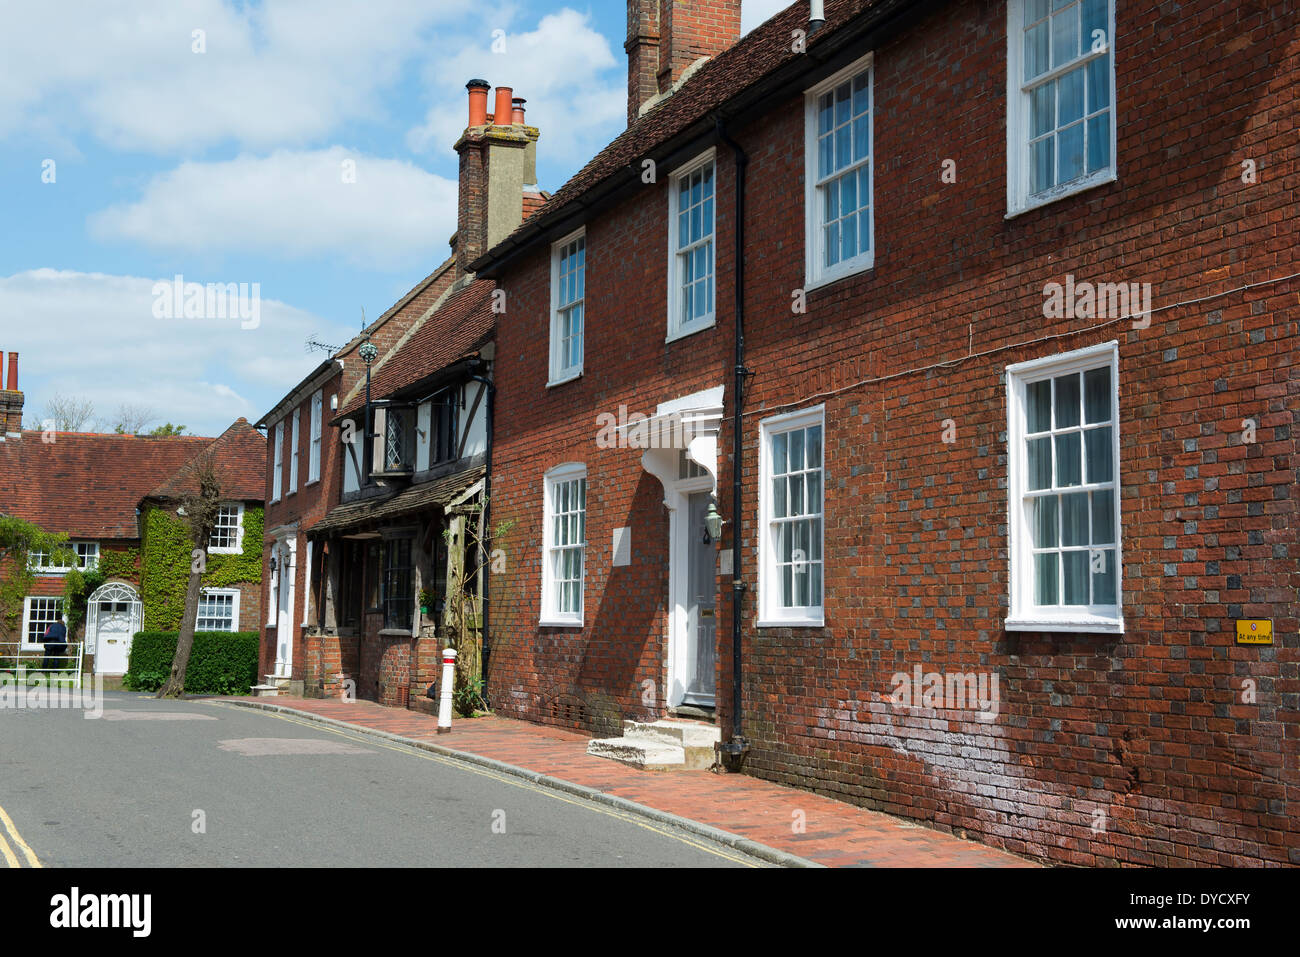 Georgian style properties on the High Street, Ditchling village, East Sussex, UK Stock Photo